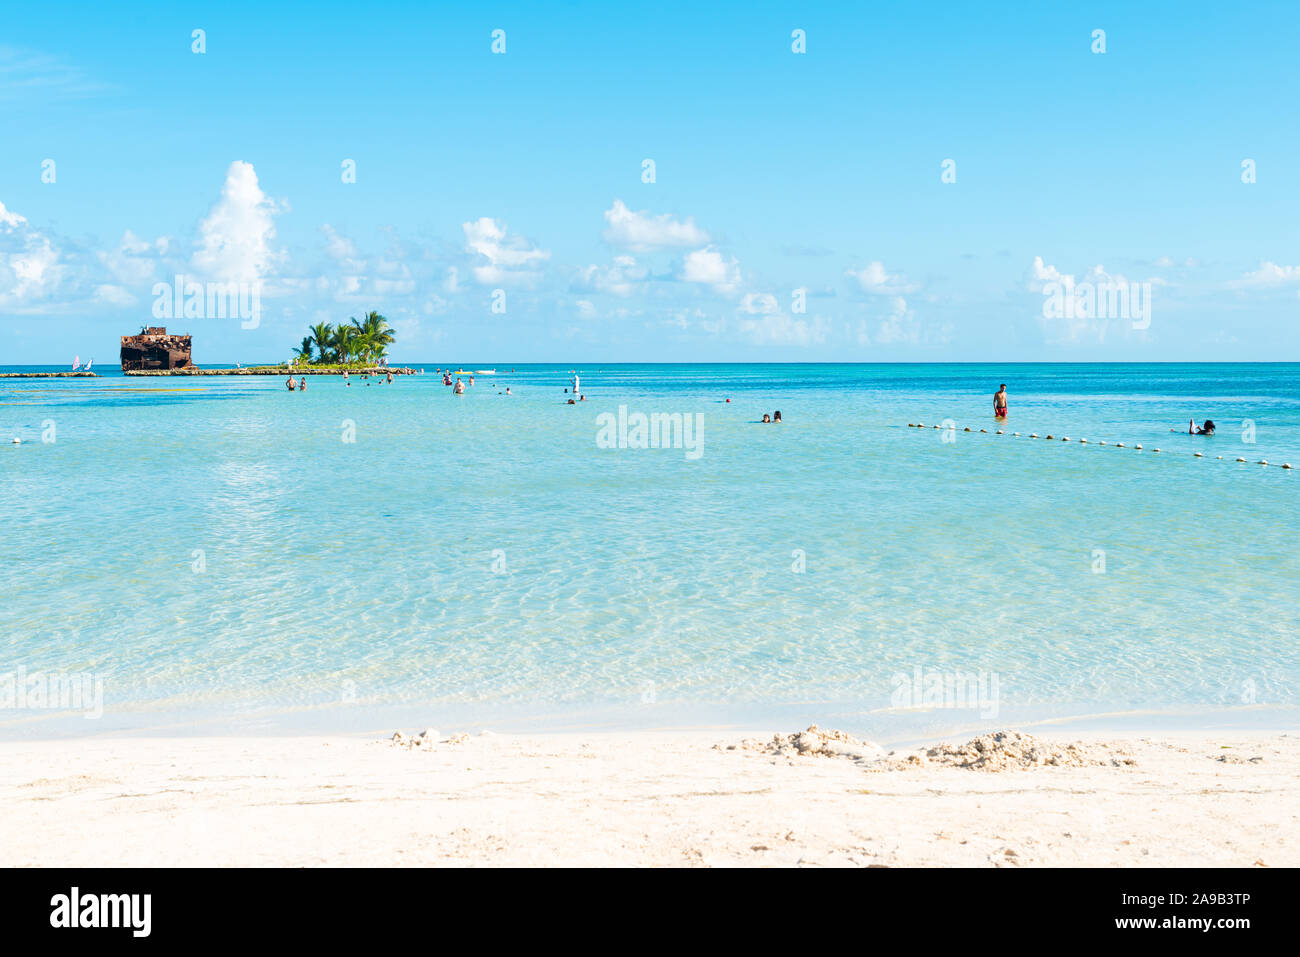 San Andres island, Colombia - Tourist enjoying the beach and walking to Rocky Cay. Stock Photo